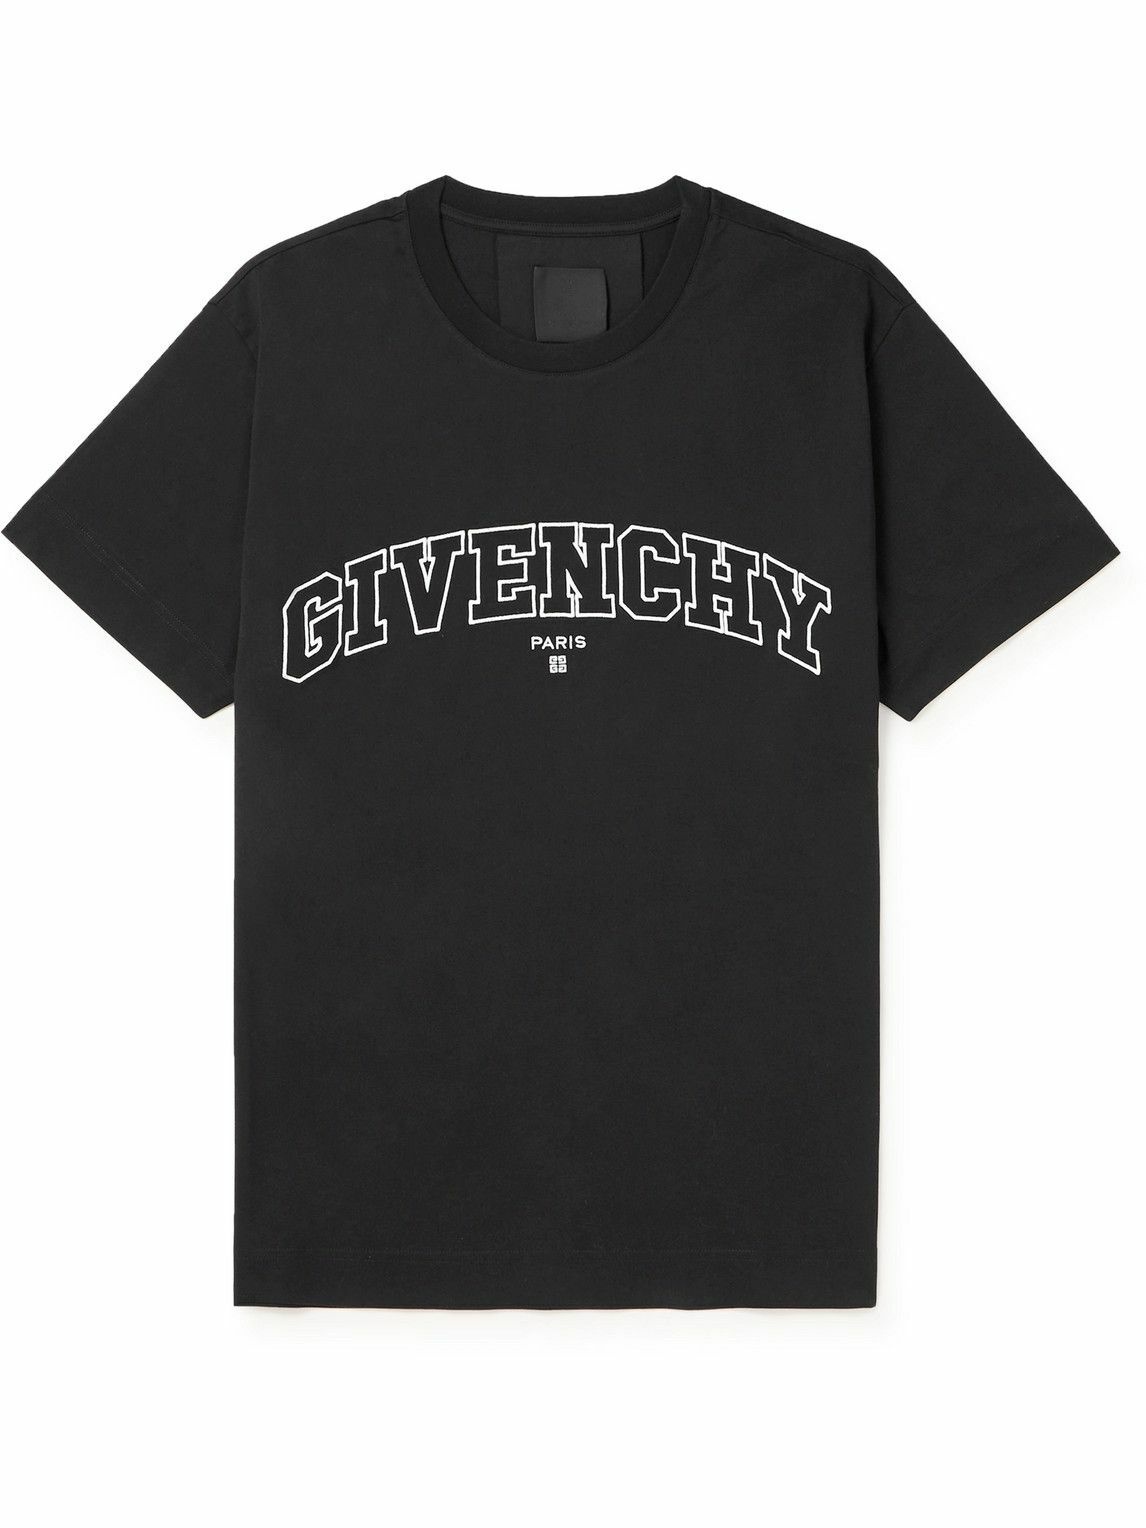 Givenchy - Logo-Embroidered Cotton-Jersey T-Shirt - Black Givenchy